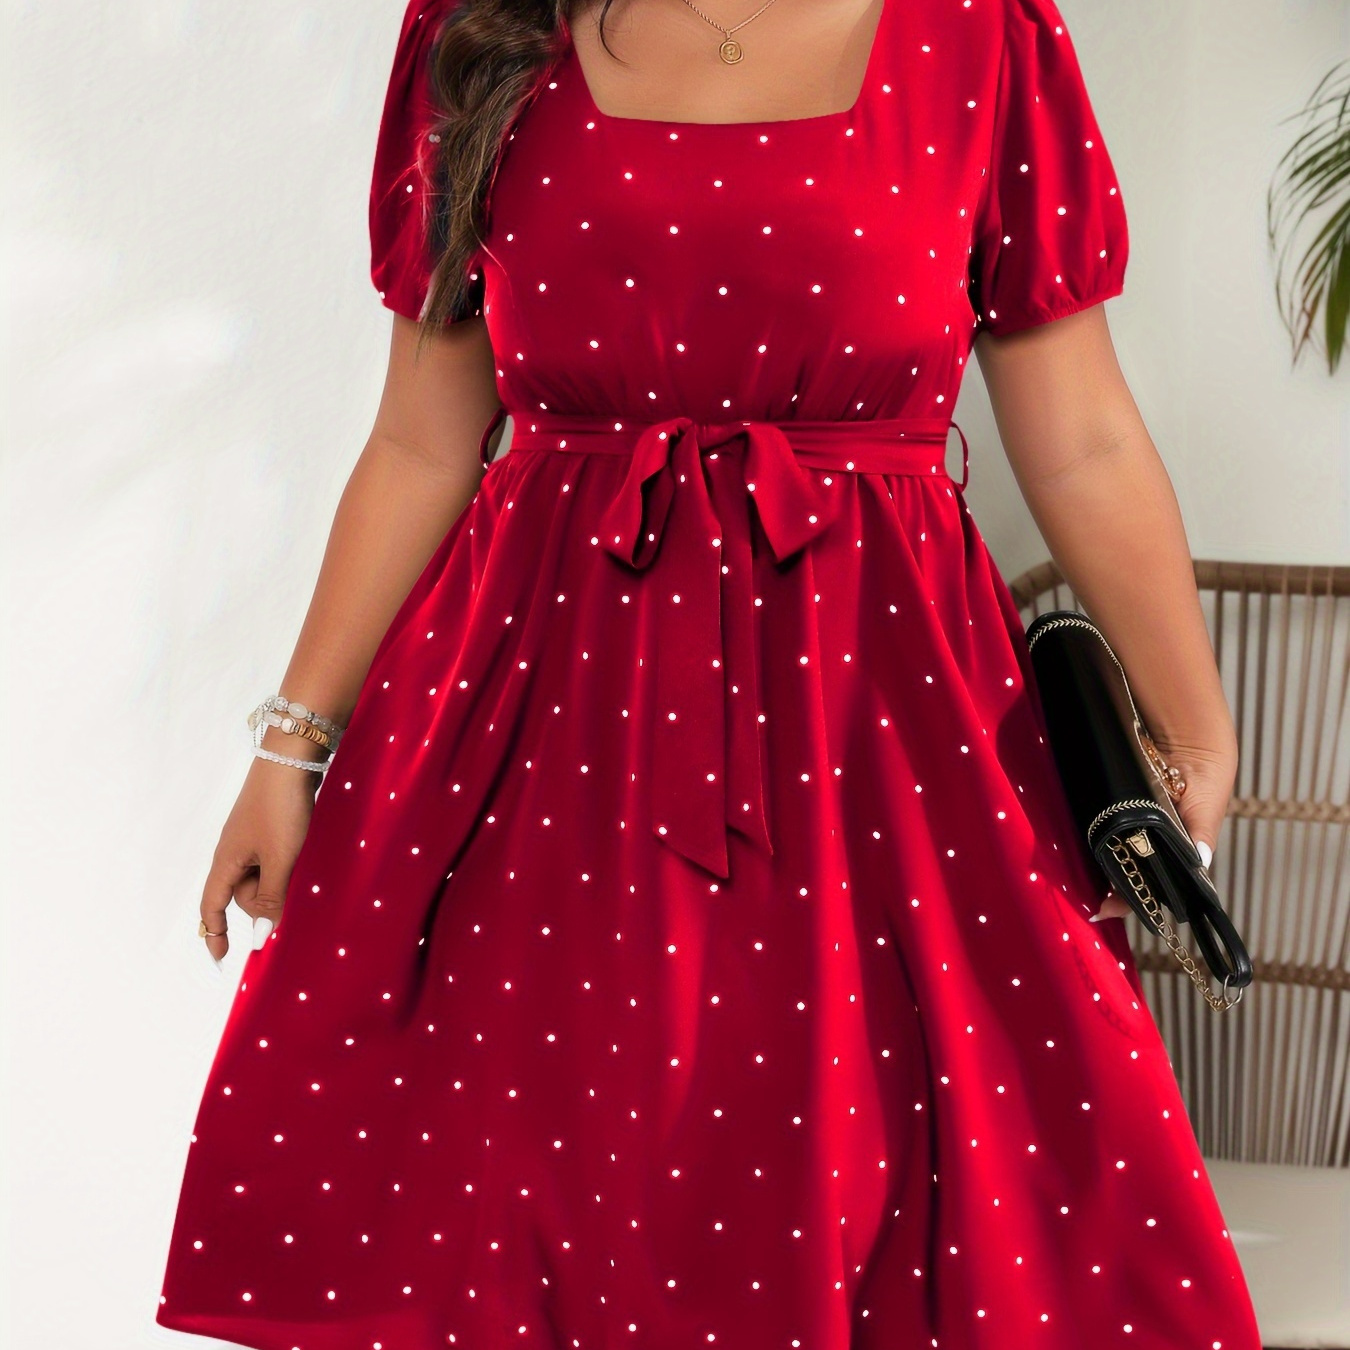 

Plus Size Polka Dot Print Belted Dress, Casual Square Neck Short Sleeve Dress For Spring & Summer, Women's Plus Size Clothing